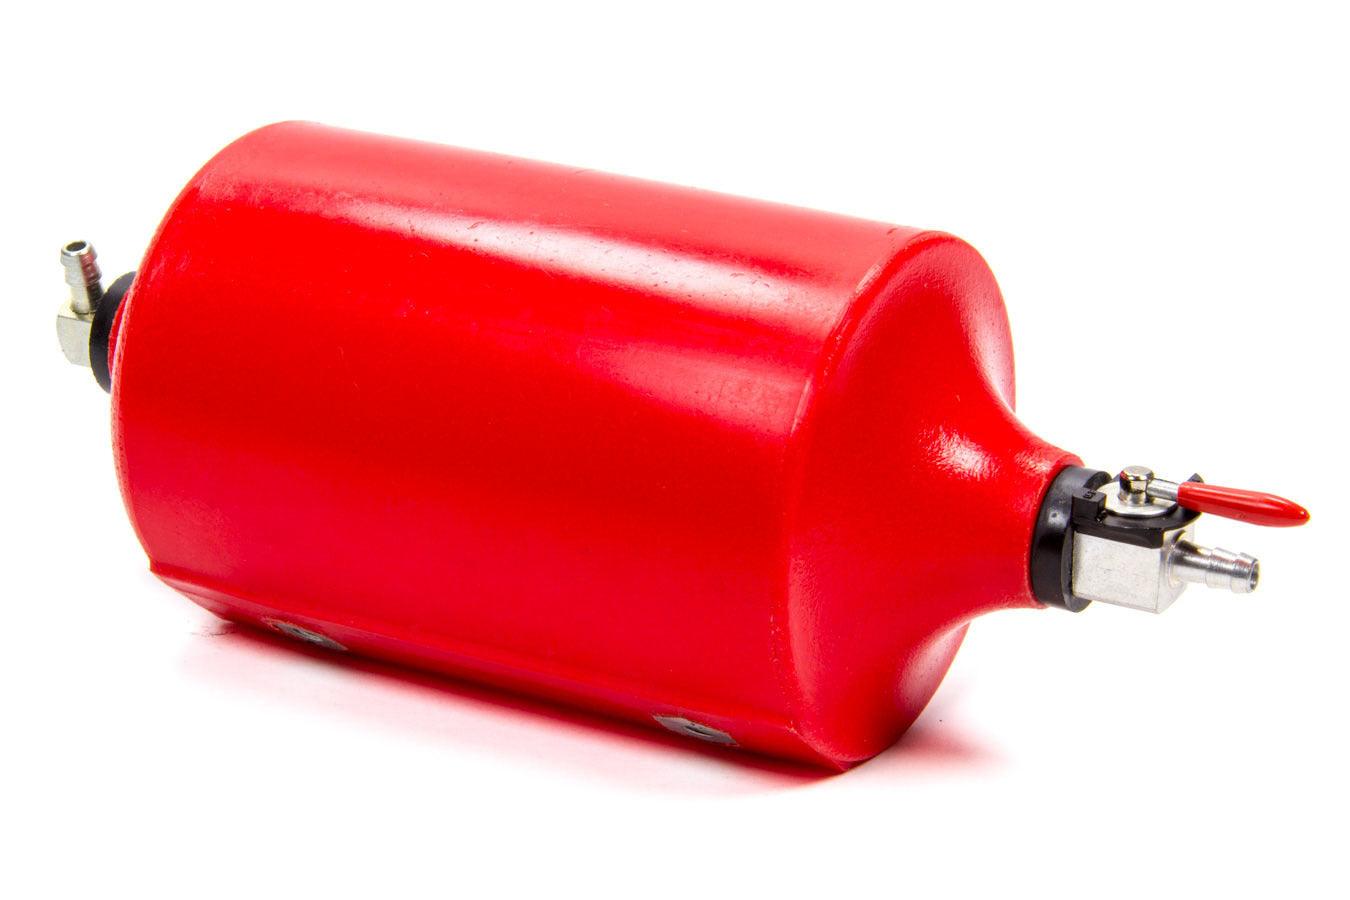 Red Radiator Catch Can 1qt. - Burlile Performance Products